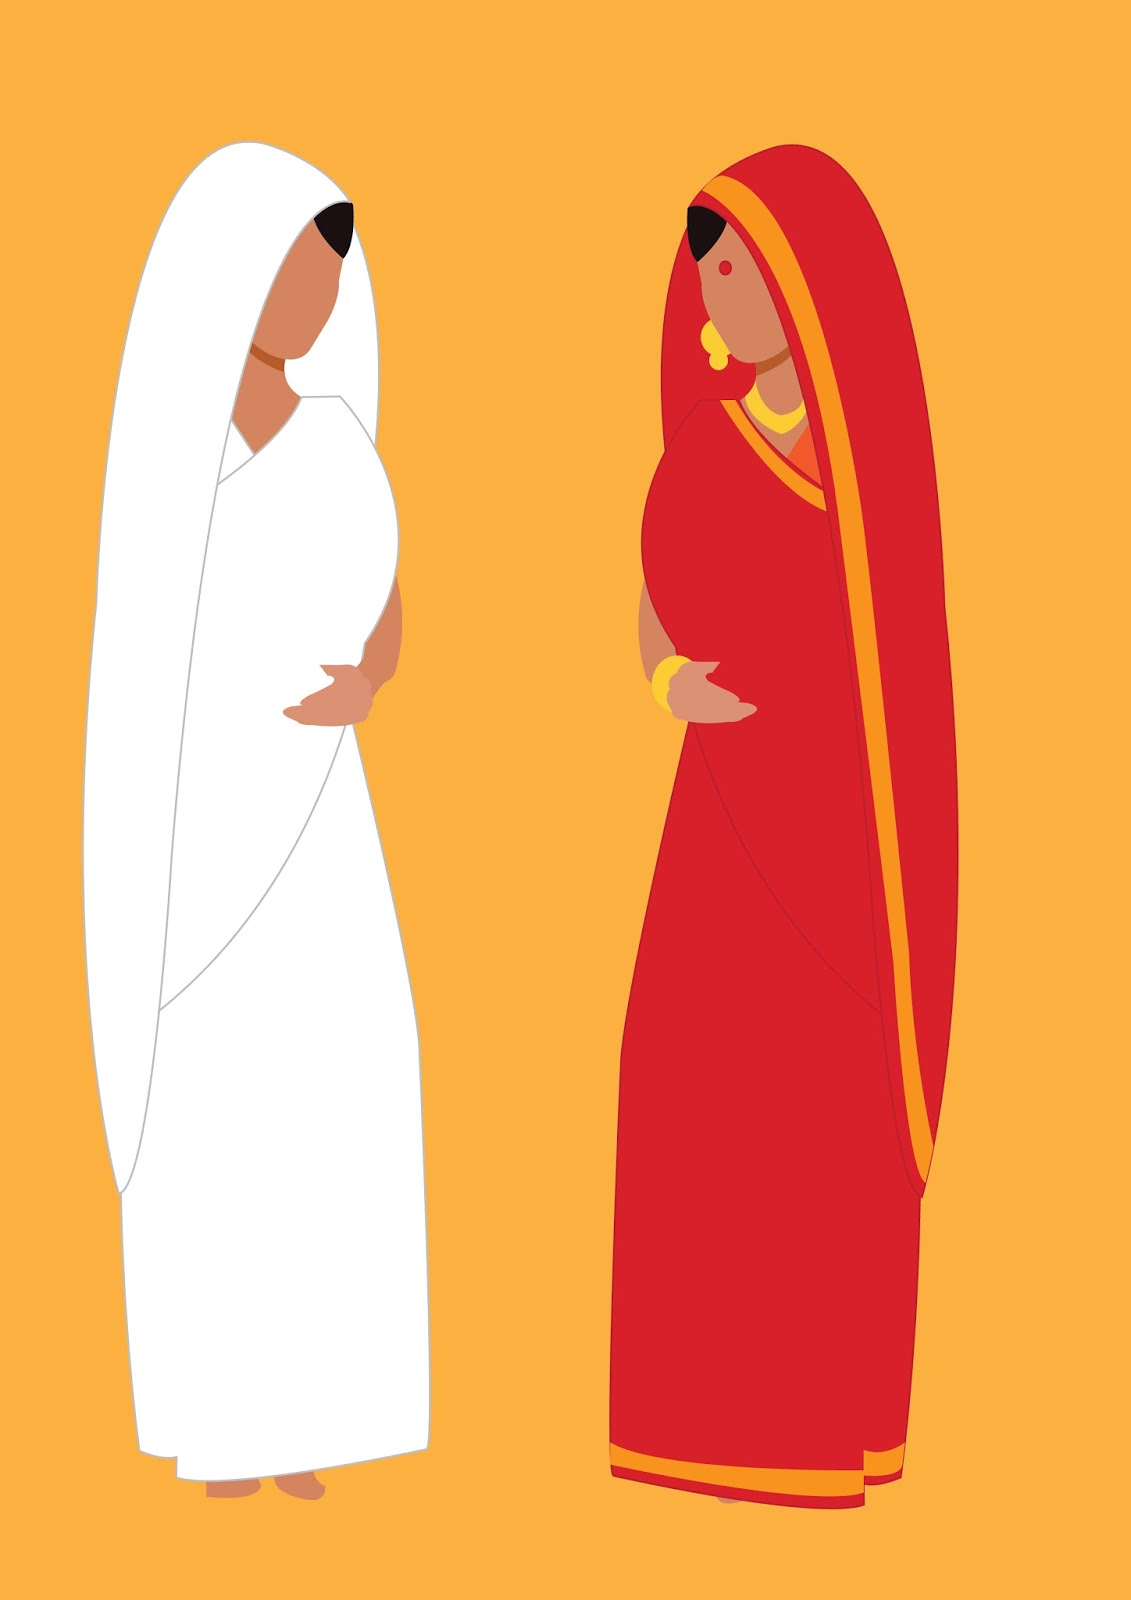 widow remarriage in ancient india